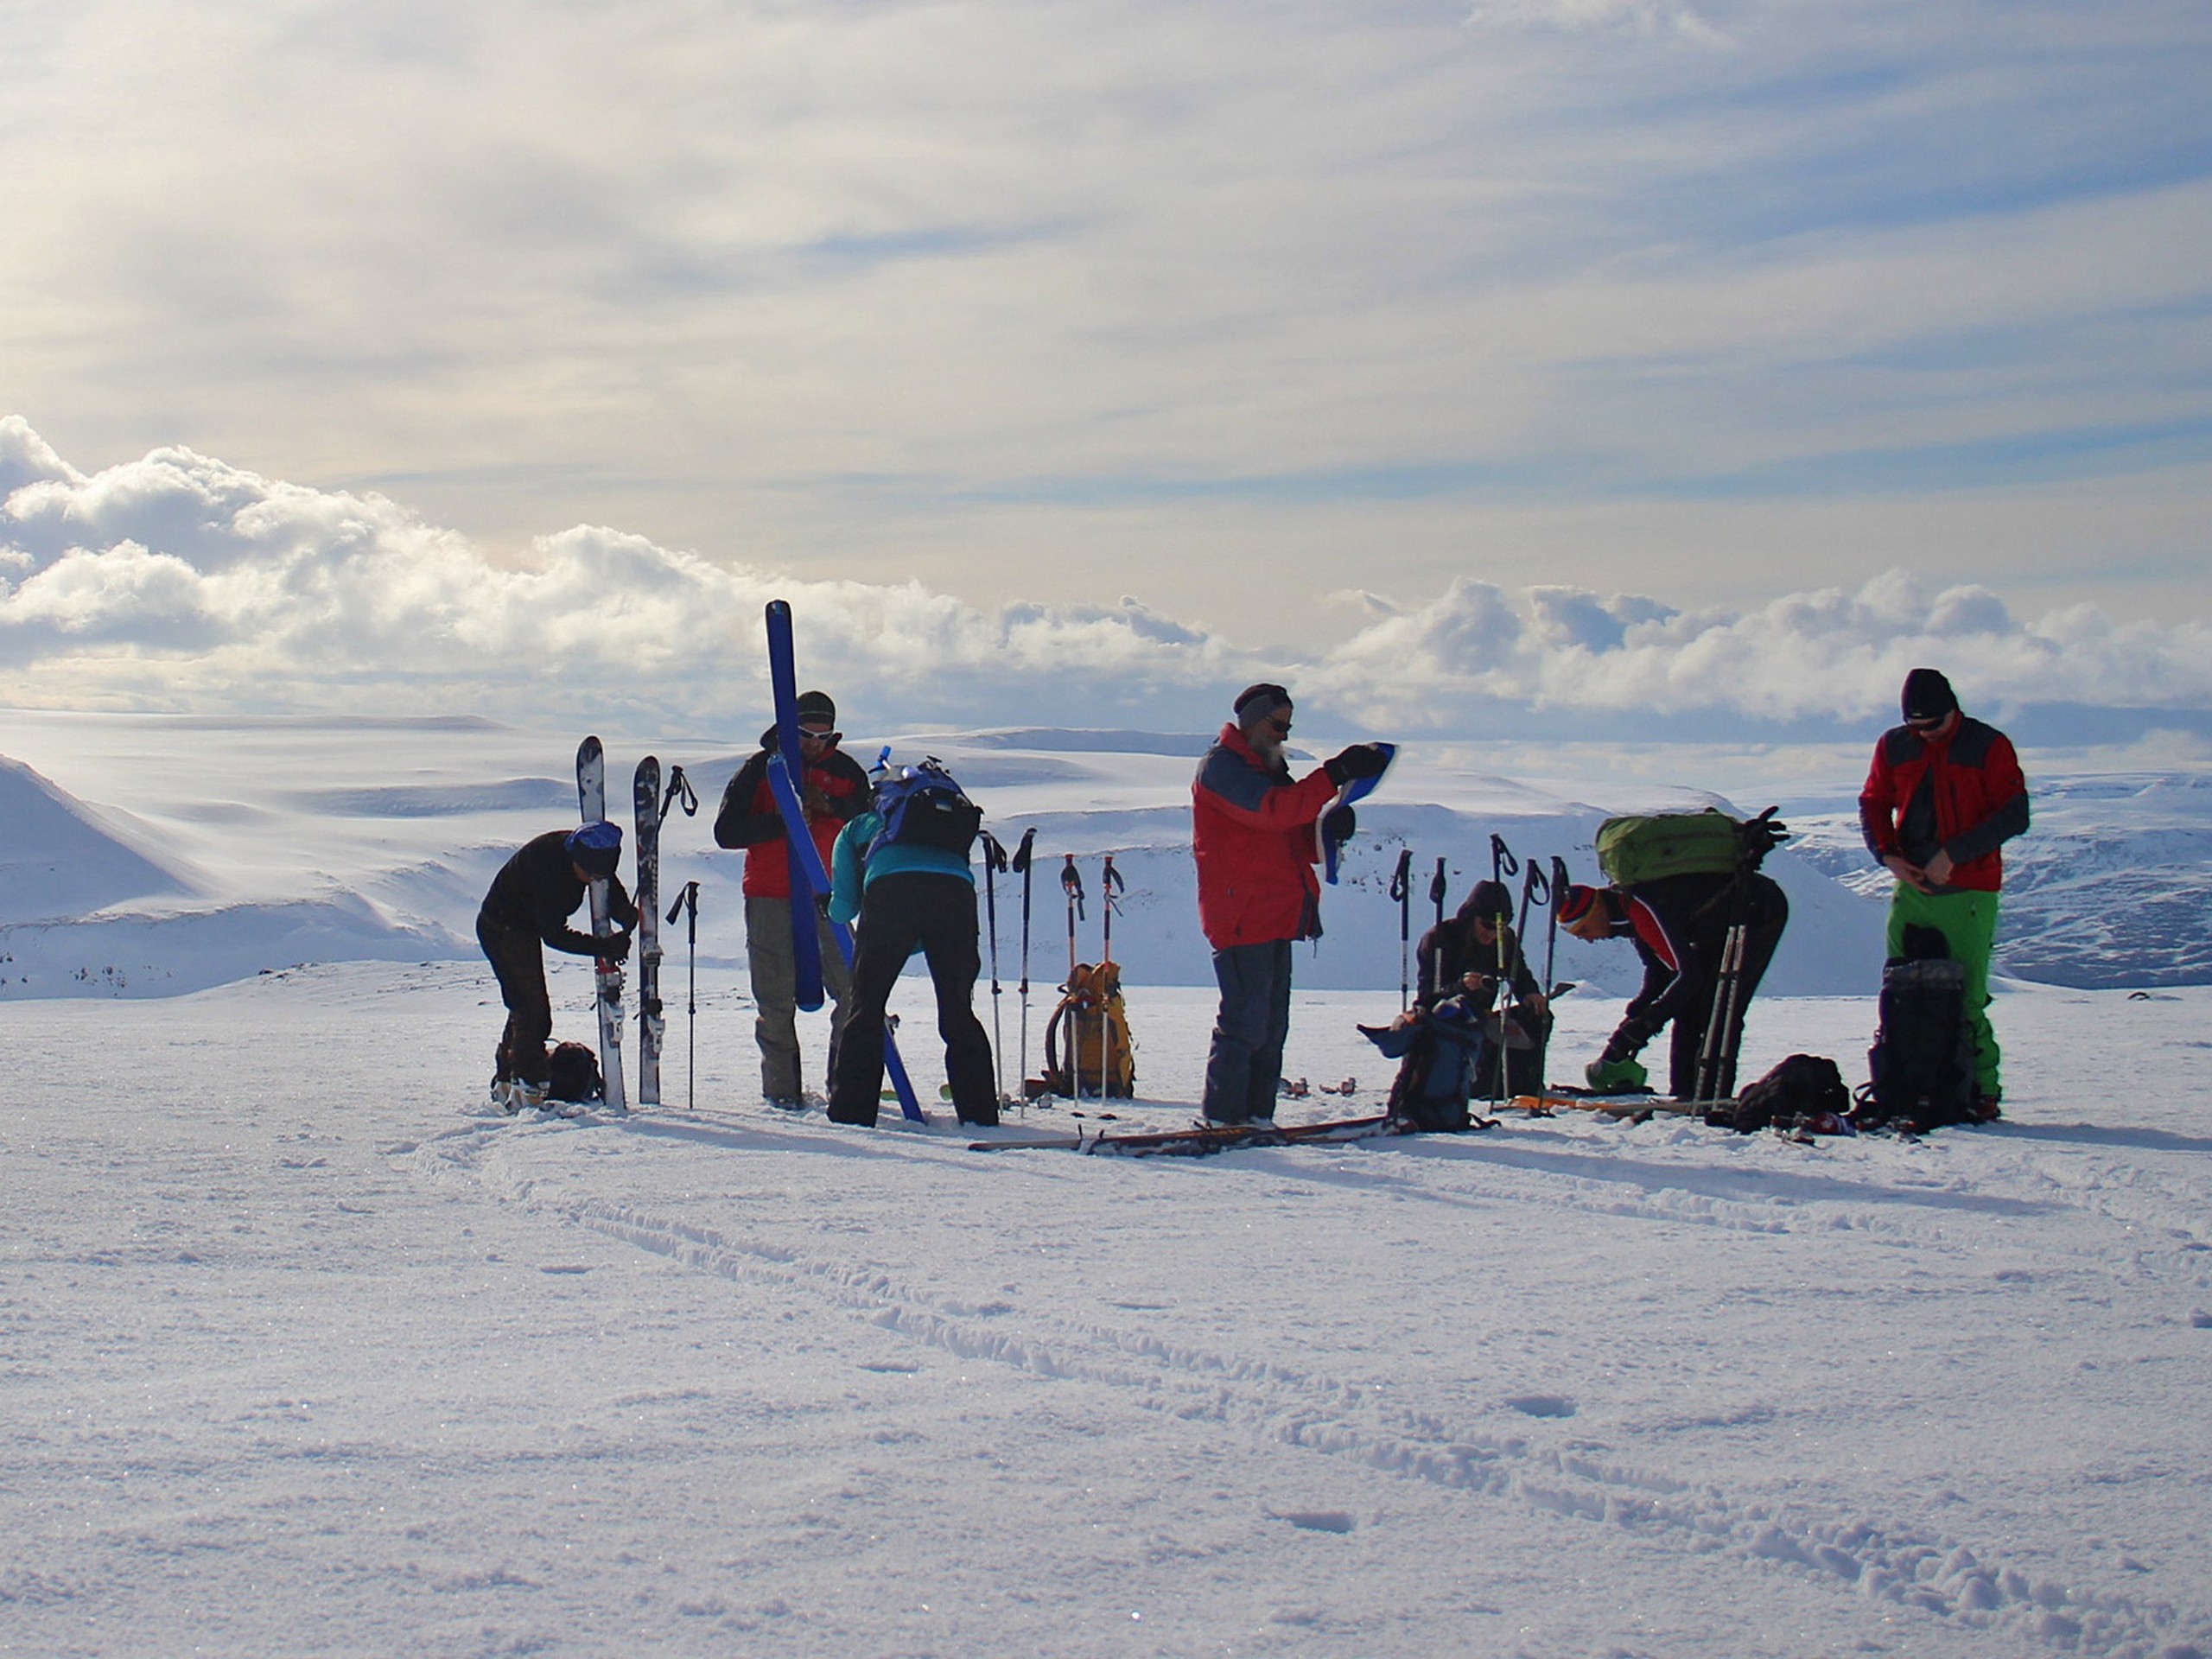 Preparing to ski down while on one of the Iceland's tallest peaks - Photo by Jan Zelina